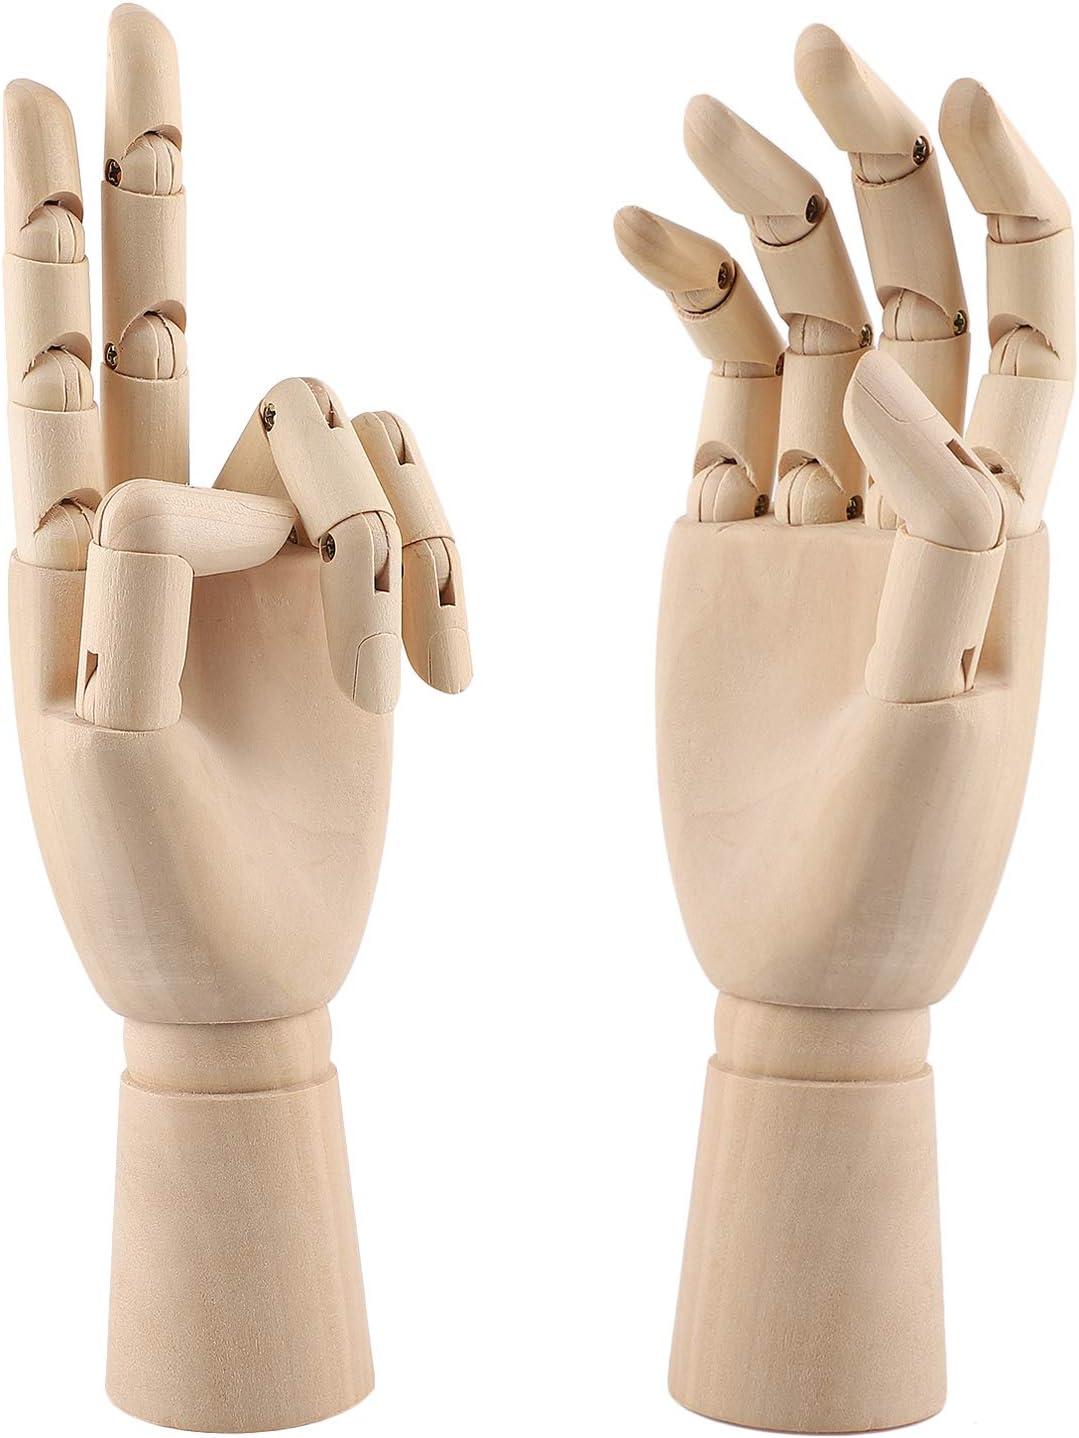 EXCEART Hand Joint Model Drawing Hand Model Left Hand Model Artists Hand  Model Jewelry Display Hand Moveable Hand Model Hand Mannequin for Drawing